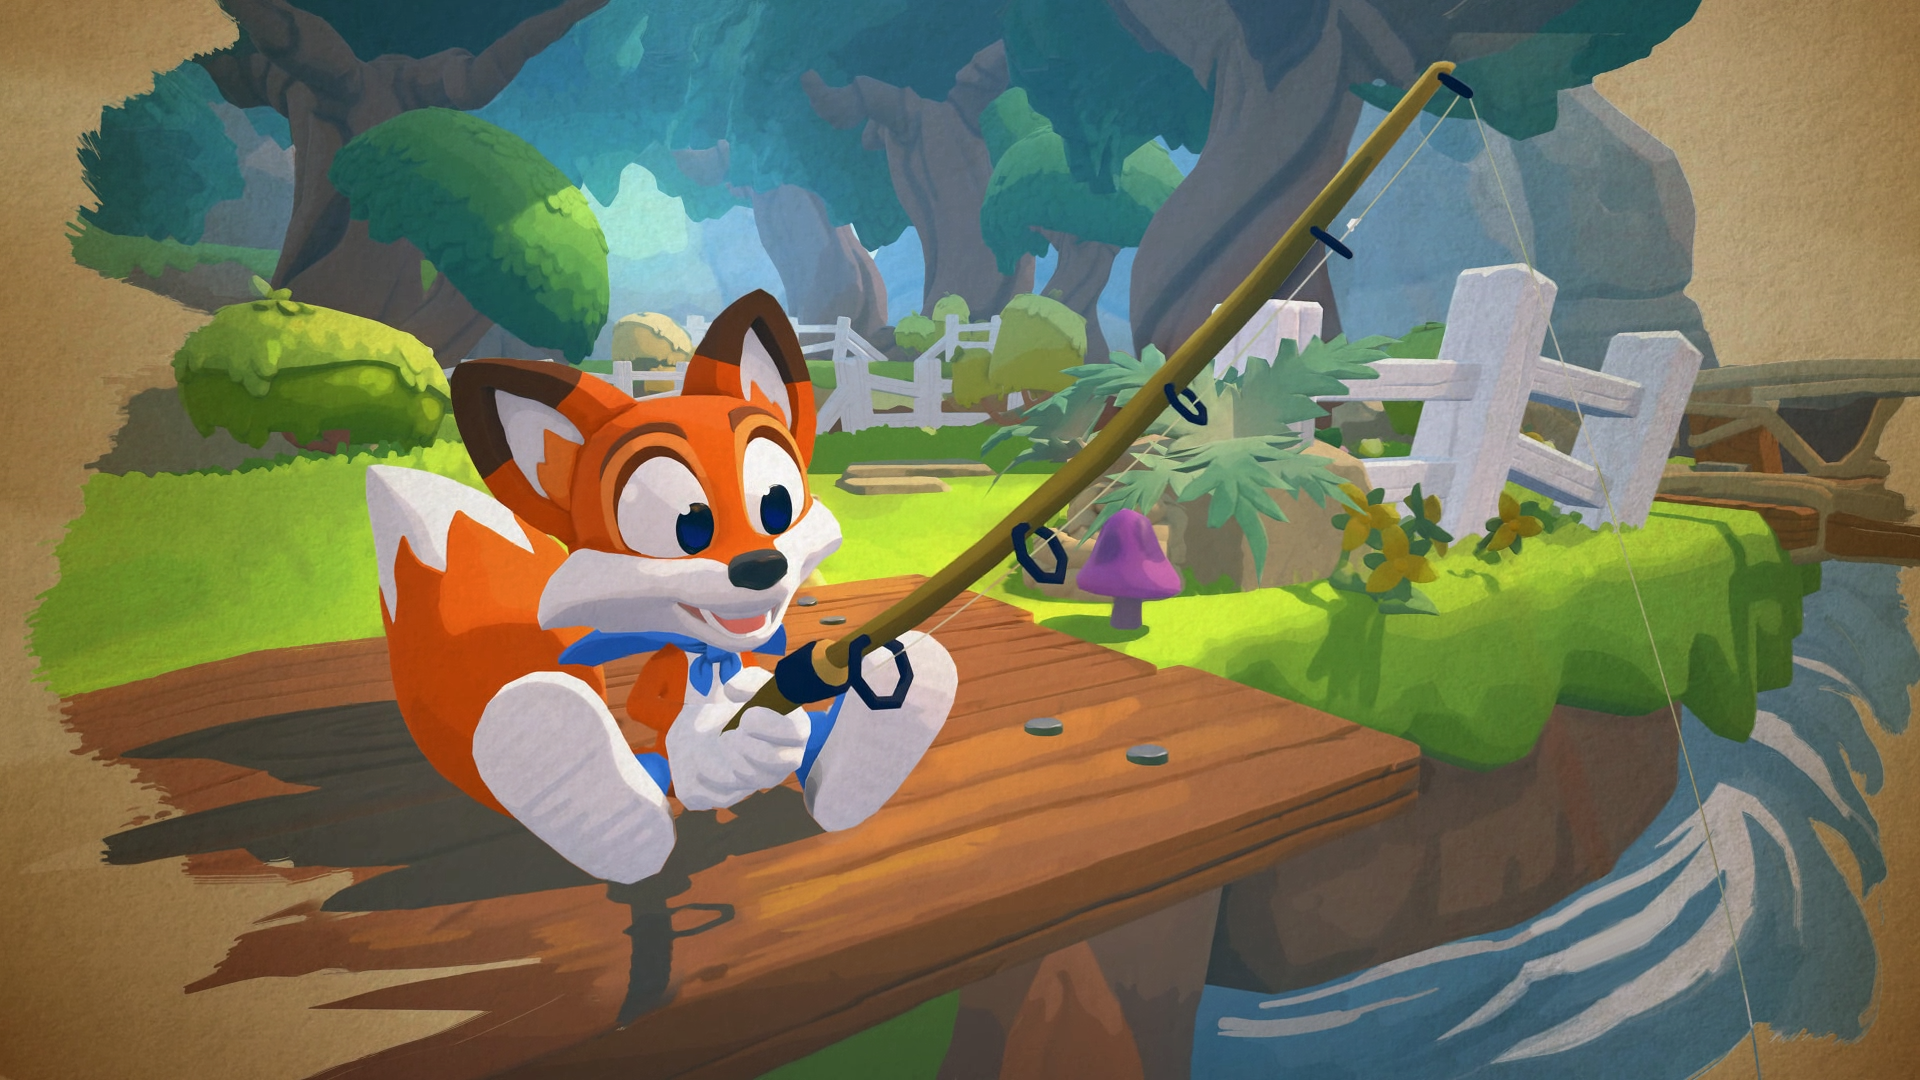 New lucky tale. Игра super Lucky's Tale. New super Lucky s Tale. Super Lucky's Tale Xbox. Super Luckys Tale Xbox.